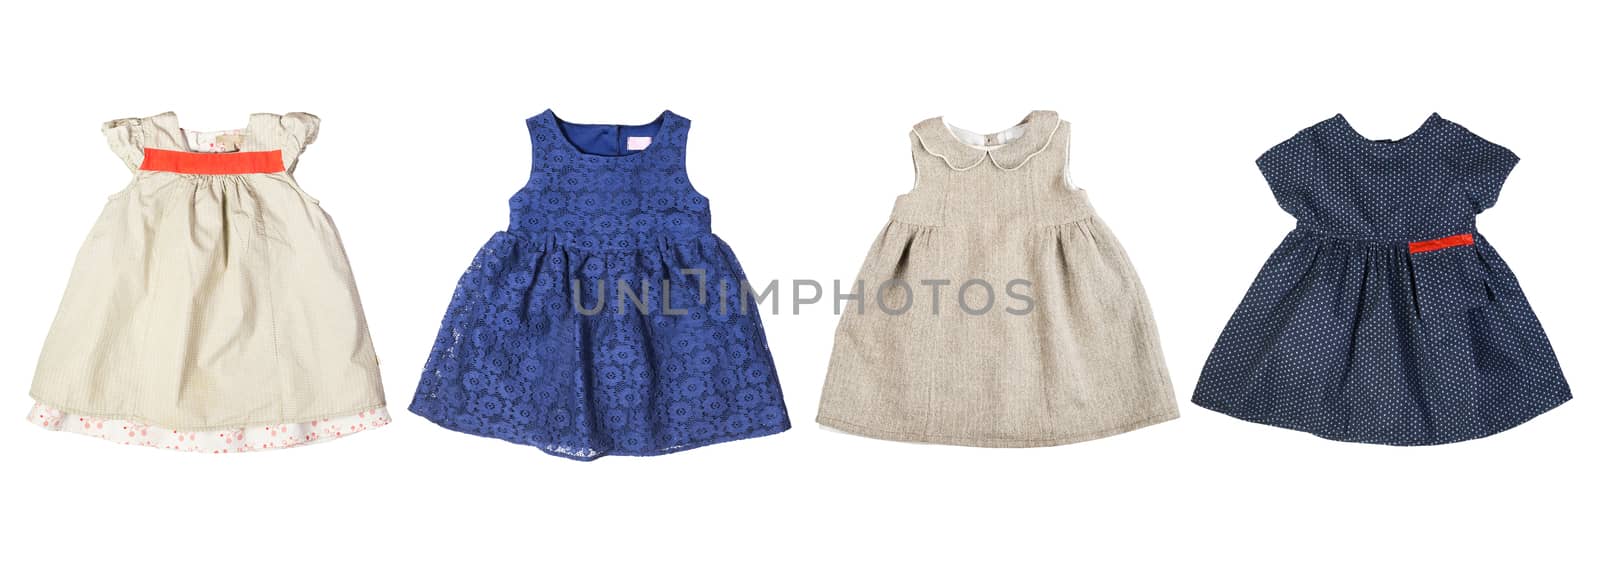 Set of cute colorful baby dresses for summer and spring wardrobe isolated on white background